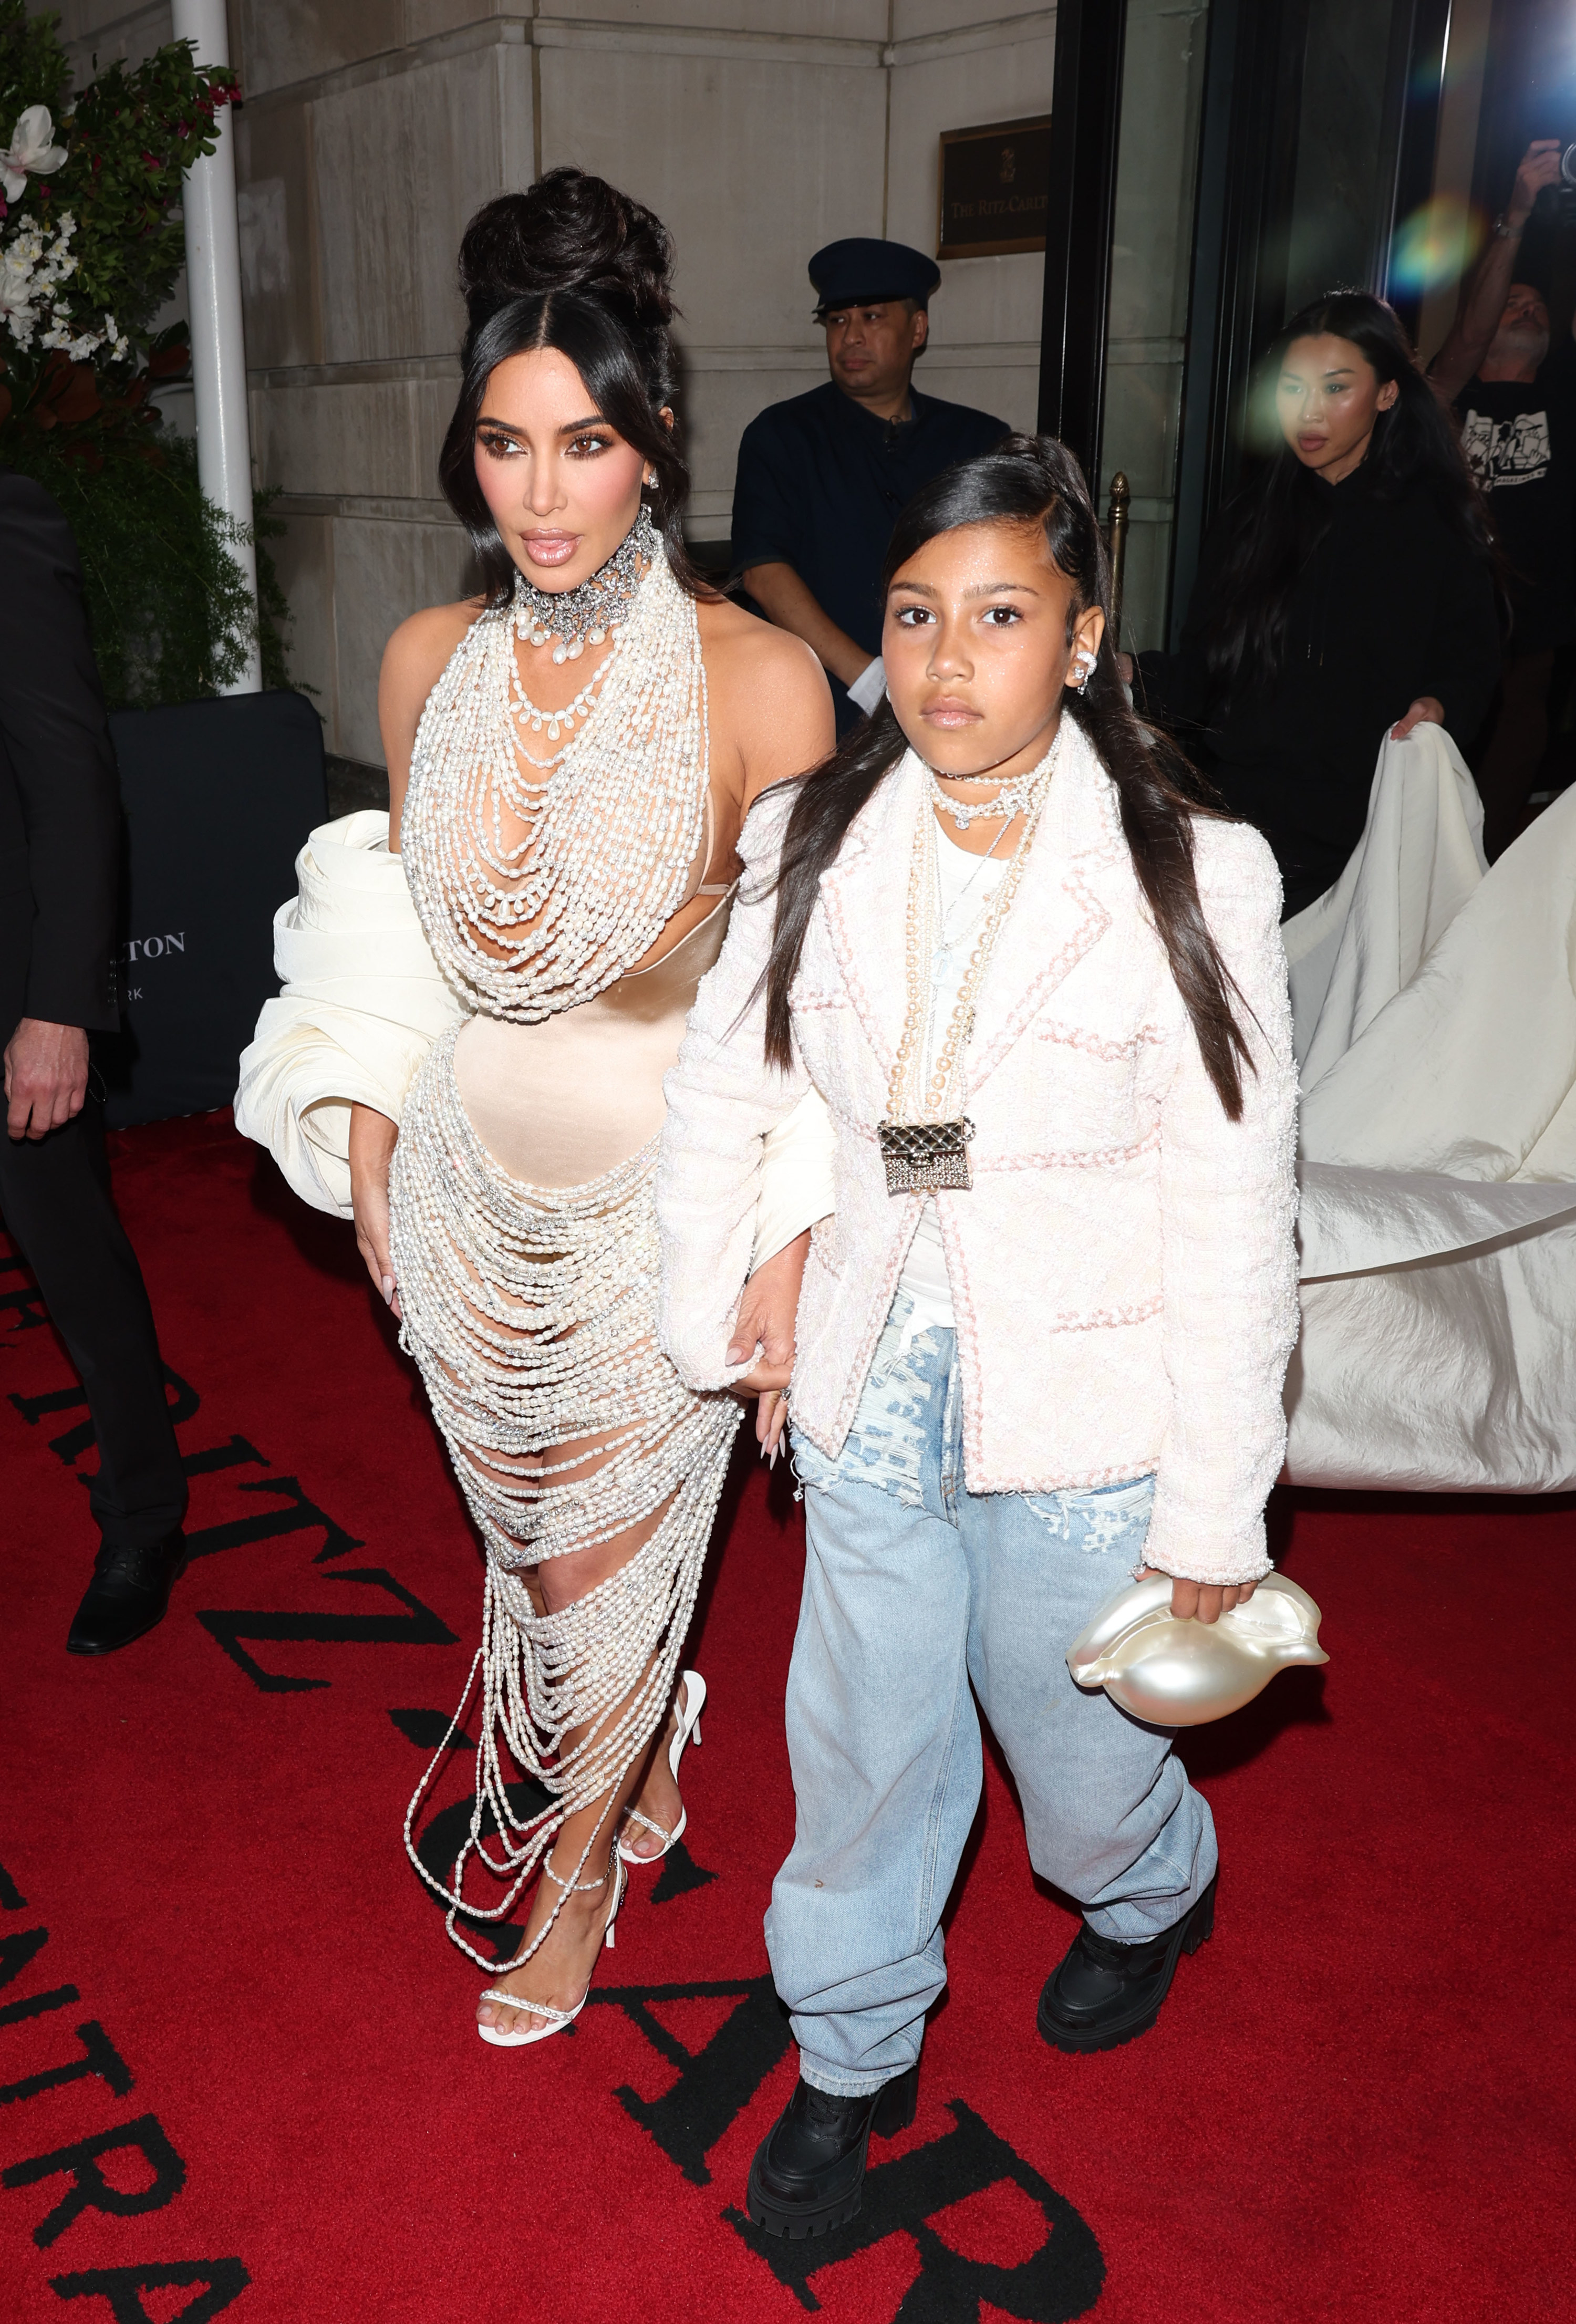 Kim and North on the red carpet